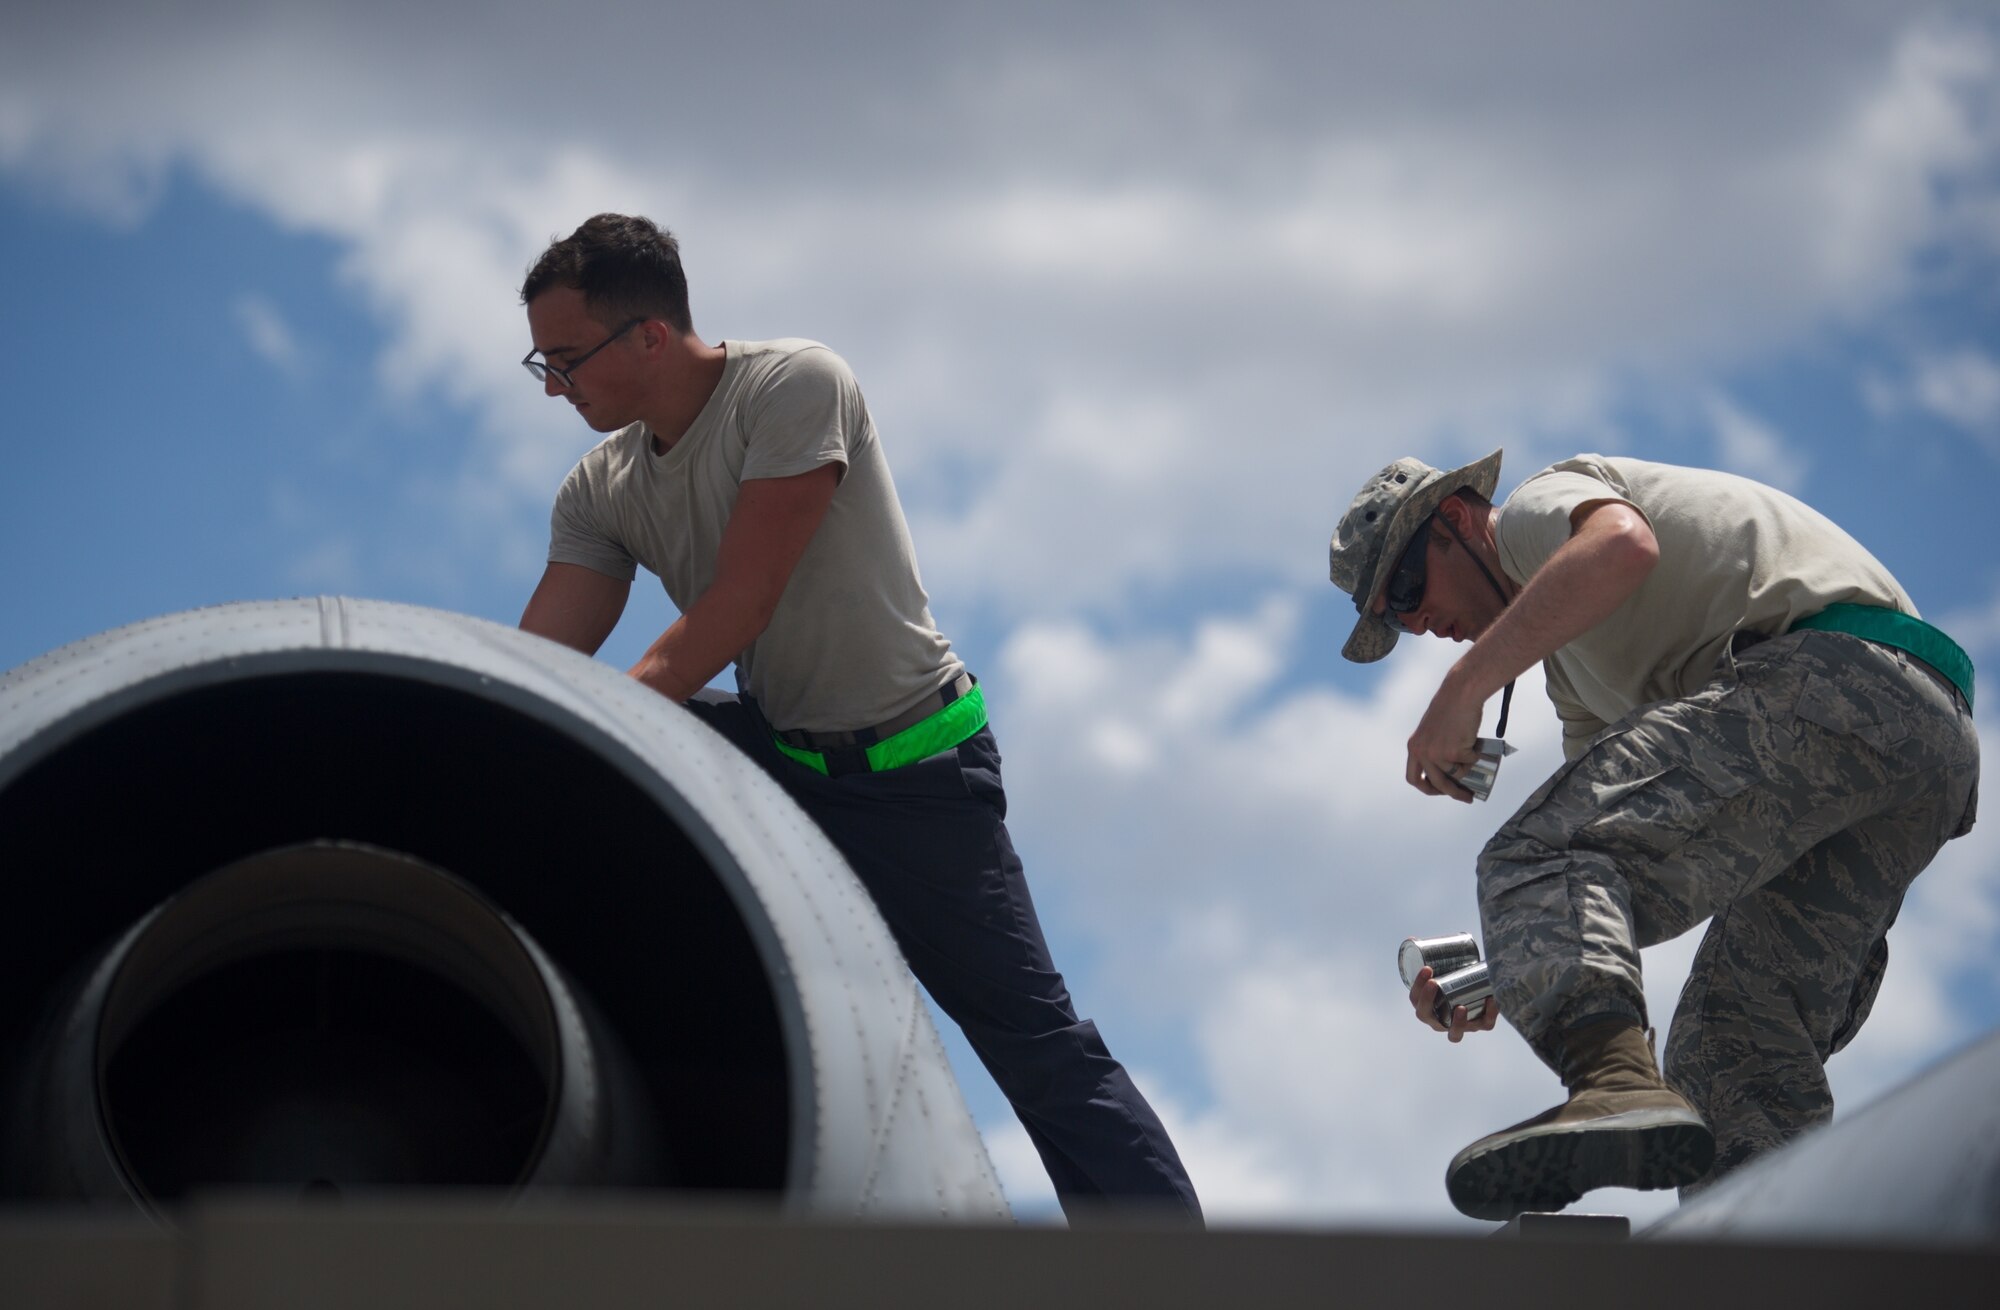 U.S. Air Force Senior Airman Matthew Rentschler, A-10 Thunderbolt II crew chief, and Staff Sgt. Joseph Defino, aerospace propulsion technician, both deployed from Osan Air Base, Republic of Korea, check the engine of an A-10C after the aircraft completed maritime domain awareness mission over the waters west of the Philippines April 21, 2016. The aircraft and Airmen are deployed in support of the first iteration of U.S. Pacific Command’s Air Contingent, which was stood up at the invitation of the Philippine government in order to promote interoperability, build upon the relationship with our Philippine counterparts, and reaffirm the U.S. commitment to the Indo-Asia-Pacific region. (U.S. Air Force photo by Capt. Susan Harrington)